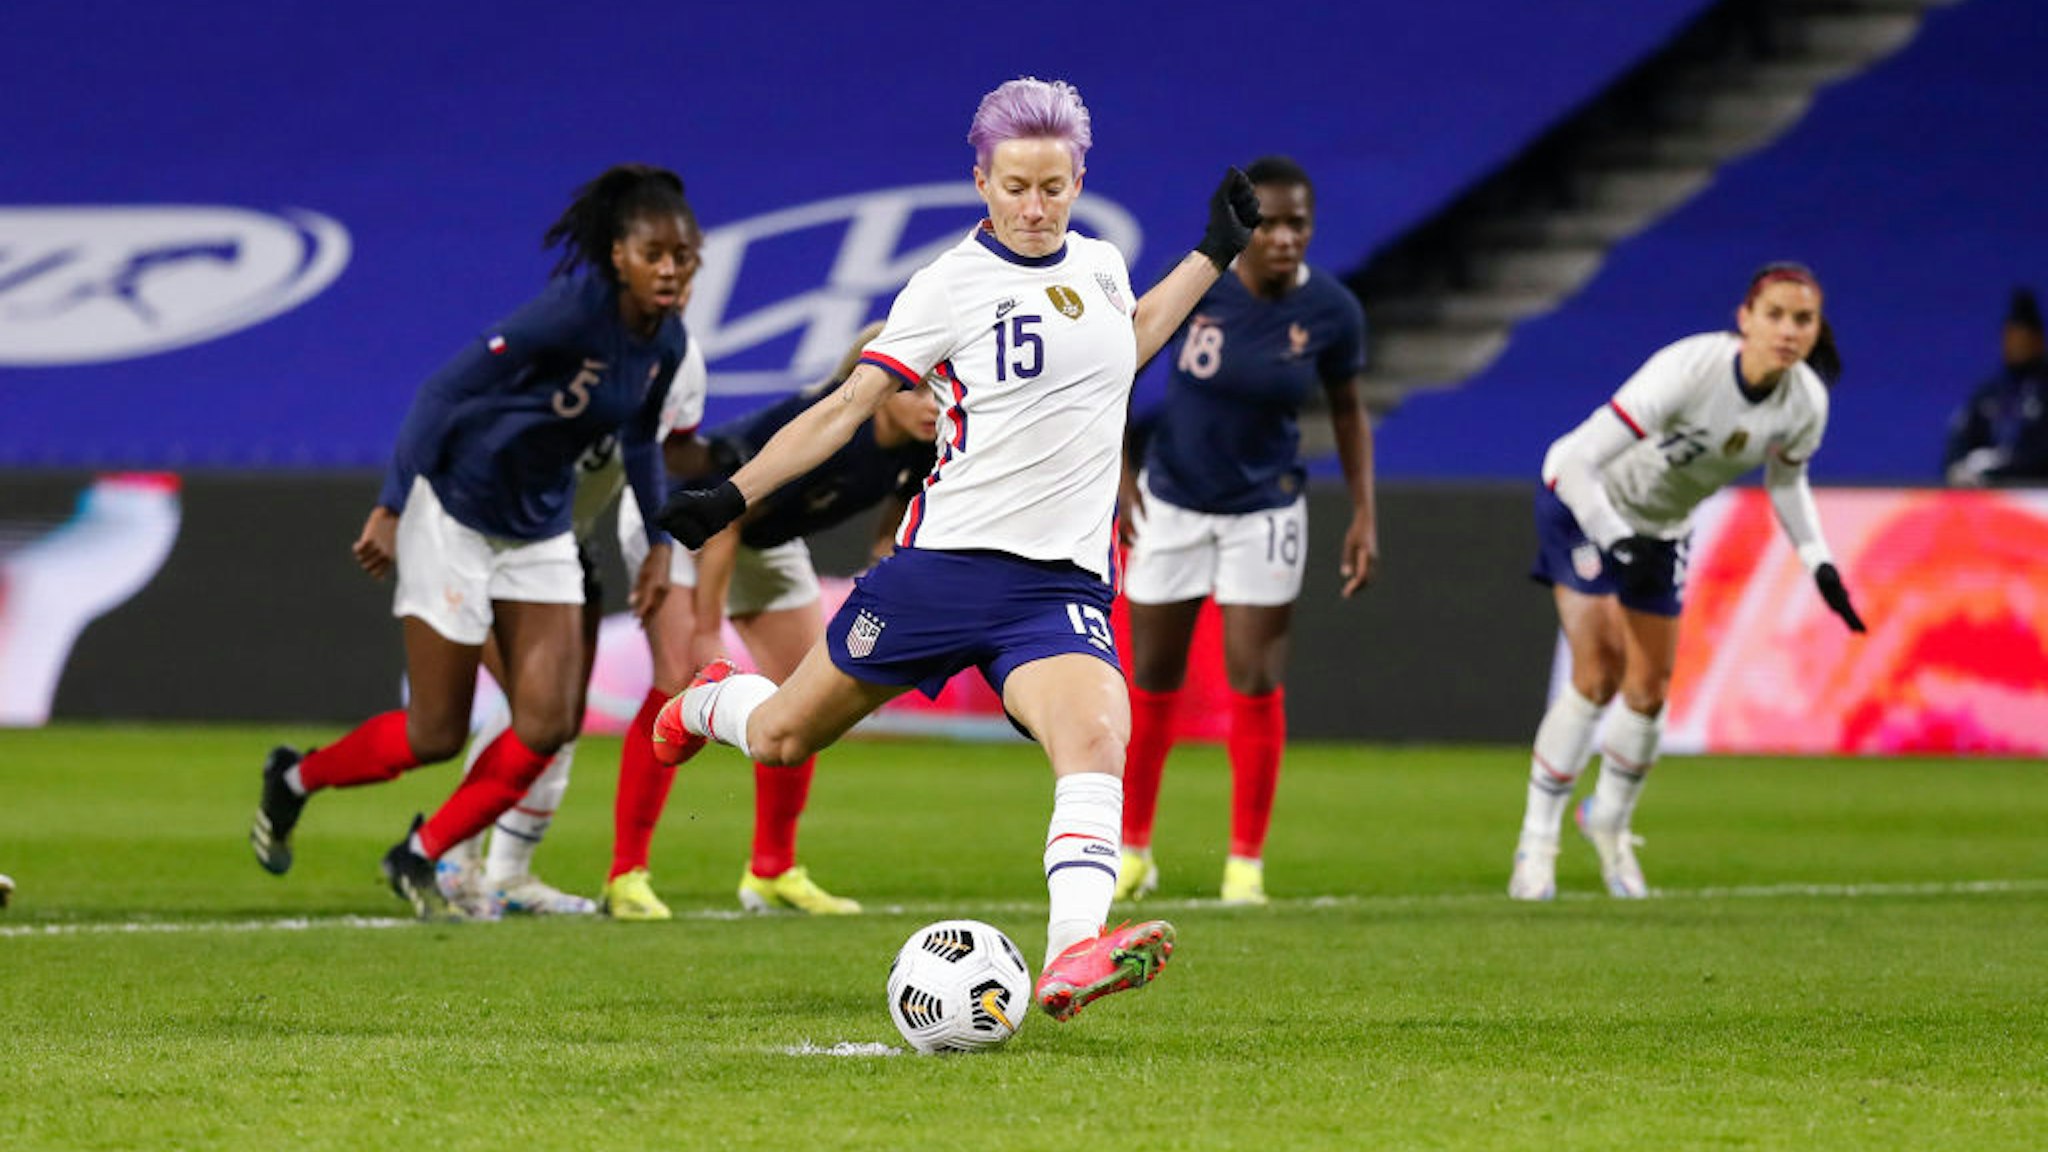 Megan Rapinoe #15 of USA shoots a penalty and scores during the International women friendly match between France and United States on April 13, 2021 in Le Havre, France.